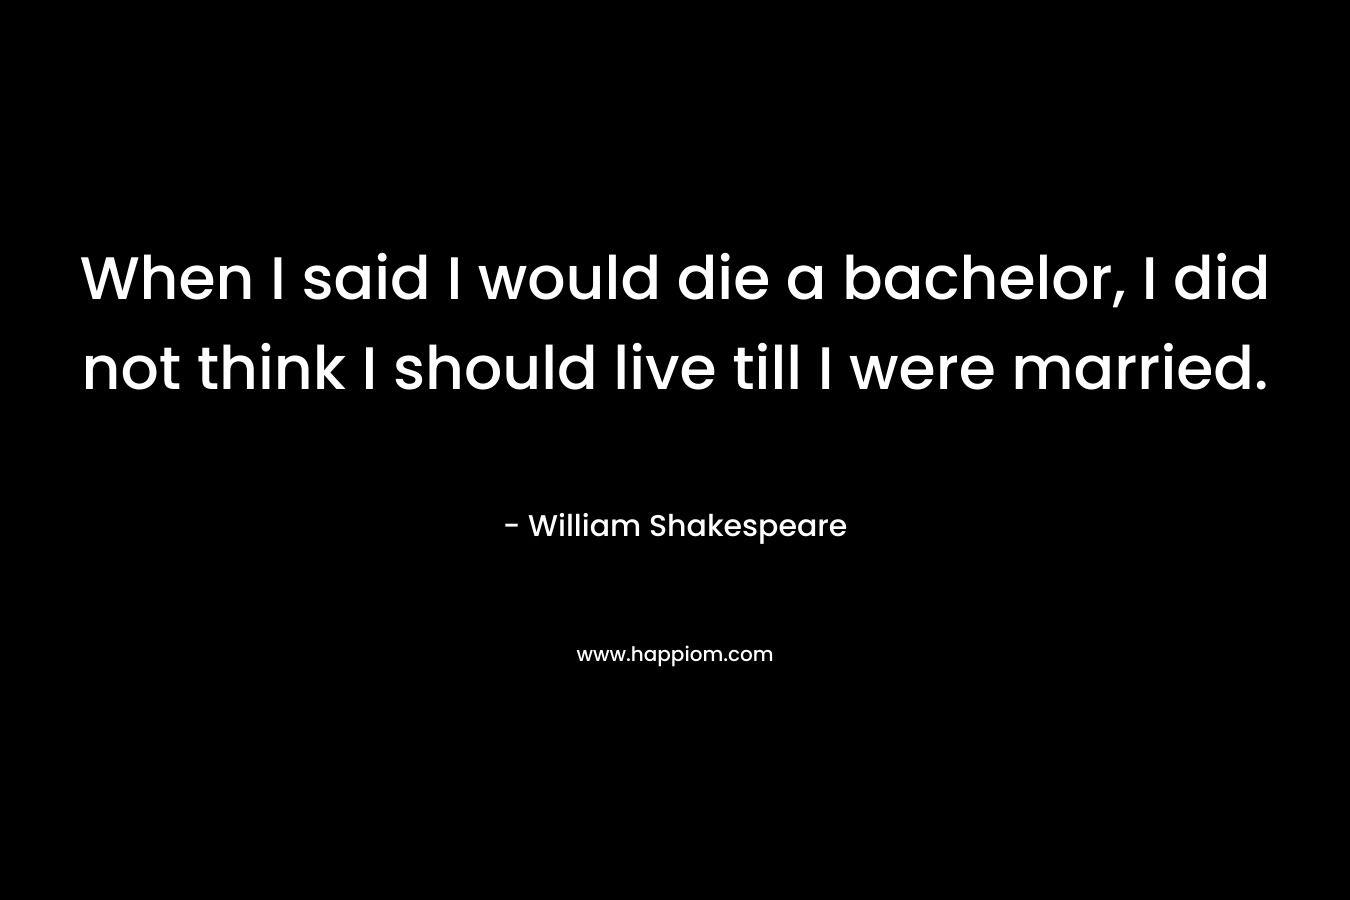 When I said I would die a bachelor, I did not think I should live till I were married. – William Shakespeare